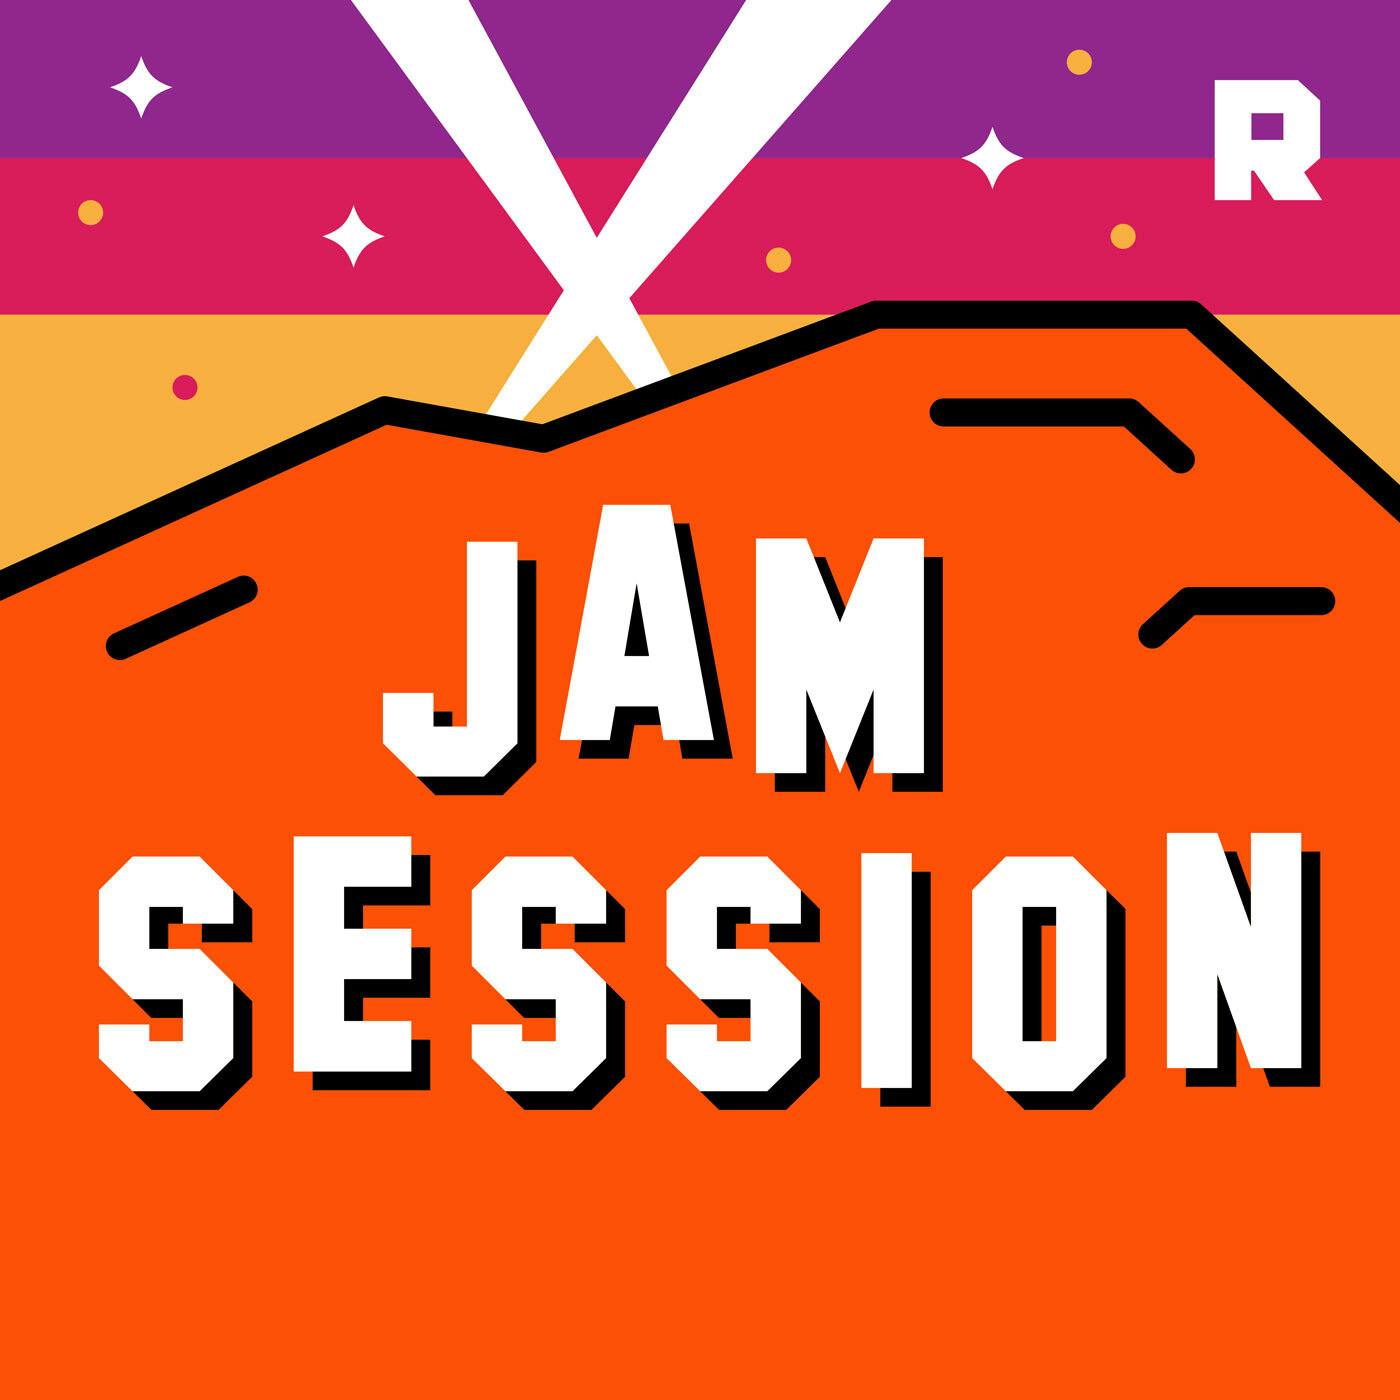 Kate Middleton Spotted, Rihanna’s $6 Million Performance, Cyrus Family Drama, and More | Jam Session